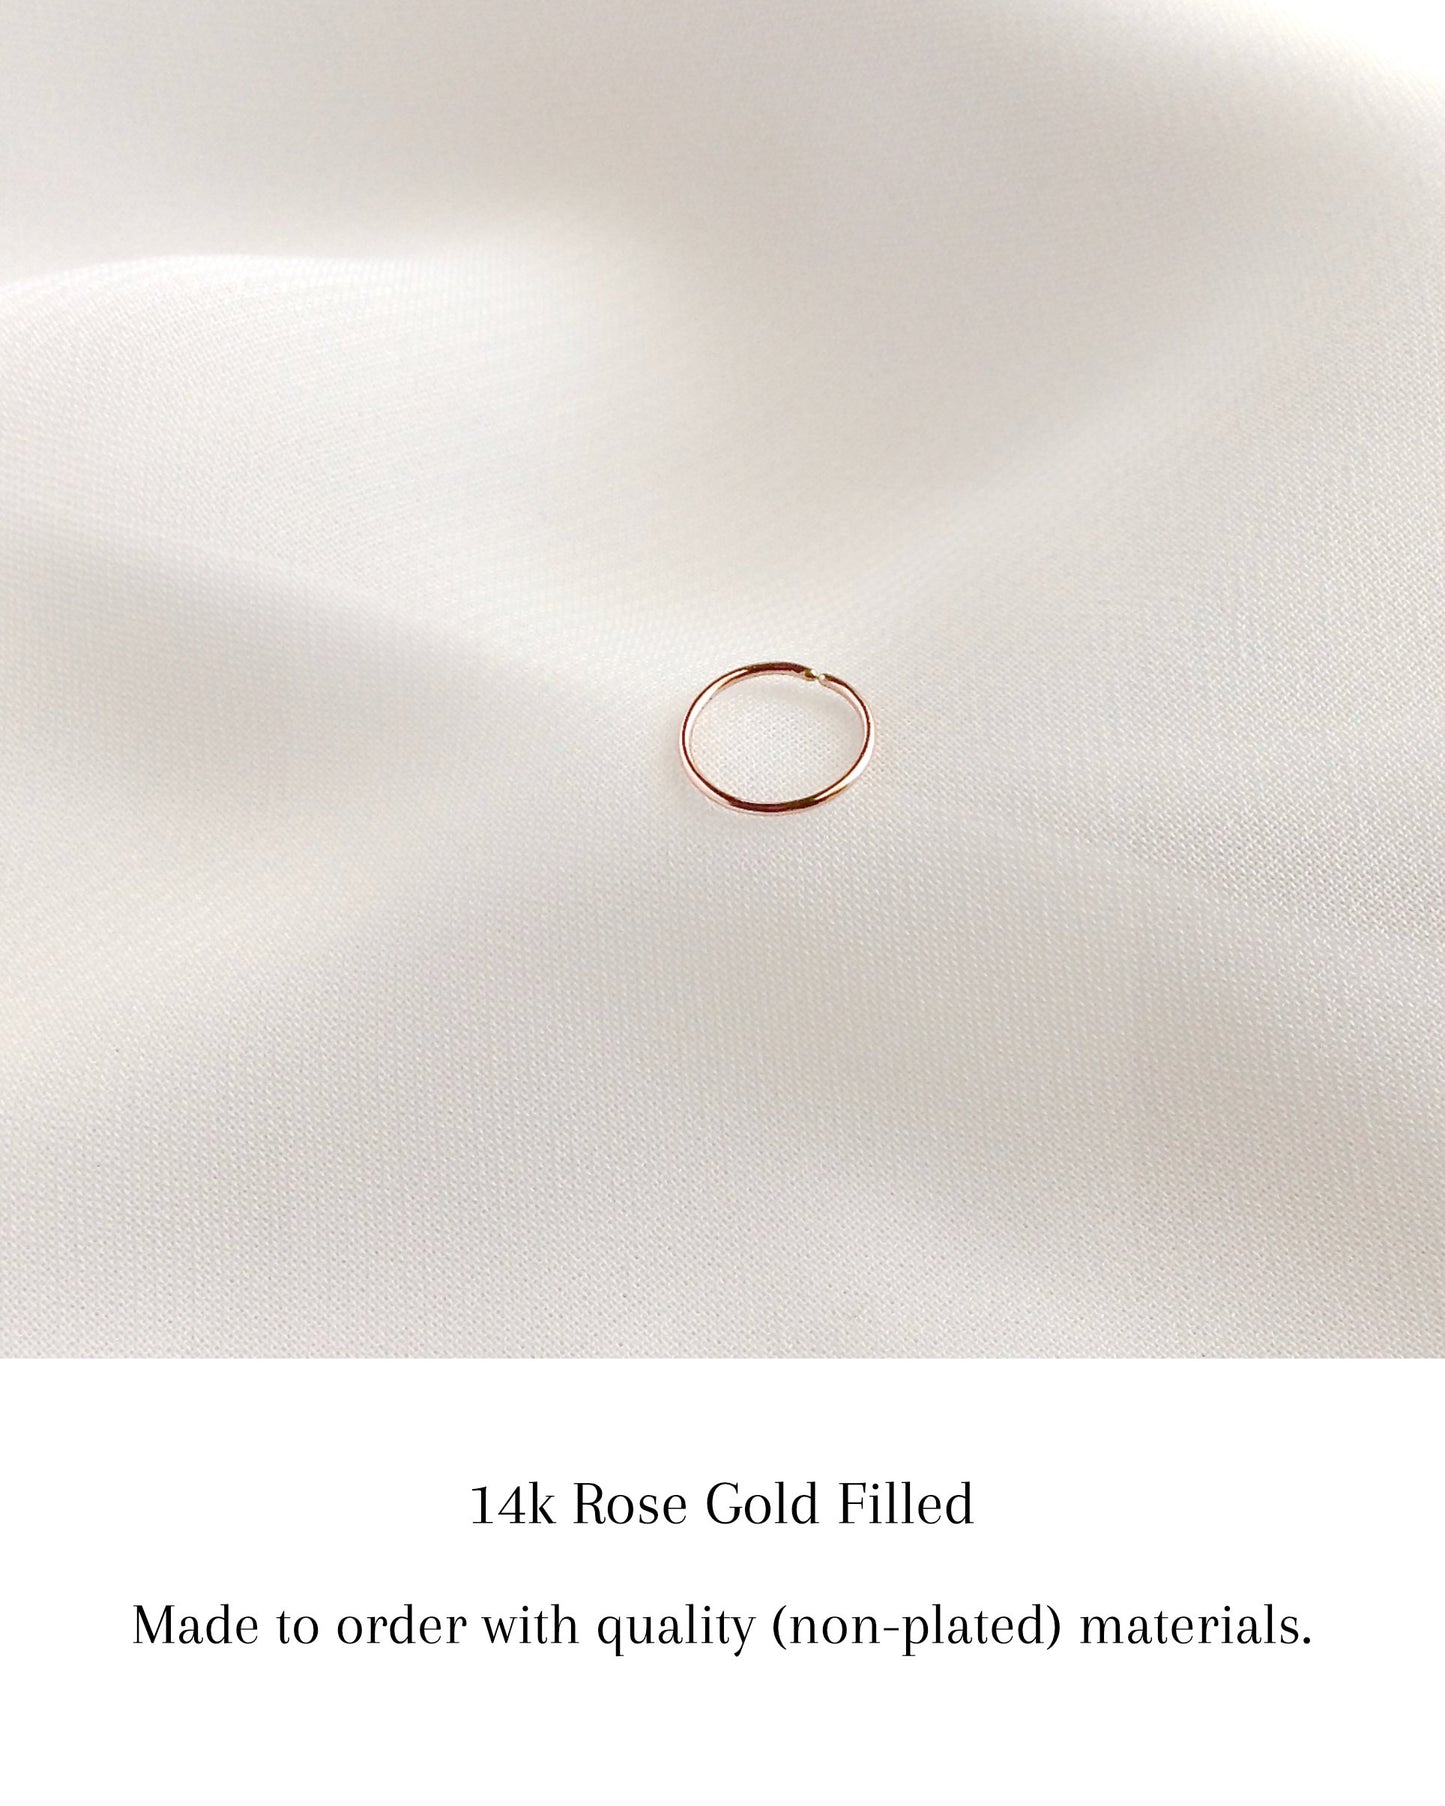 Rose Gold Filled Cartilage Hoop Quality Materials | IB Jewelry